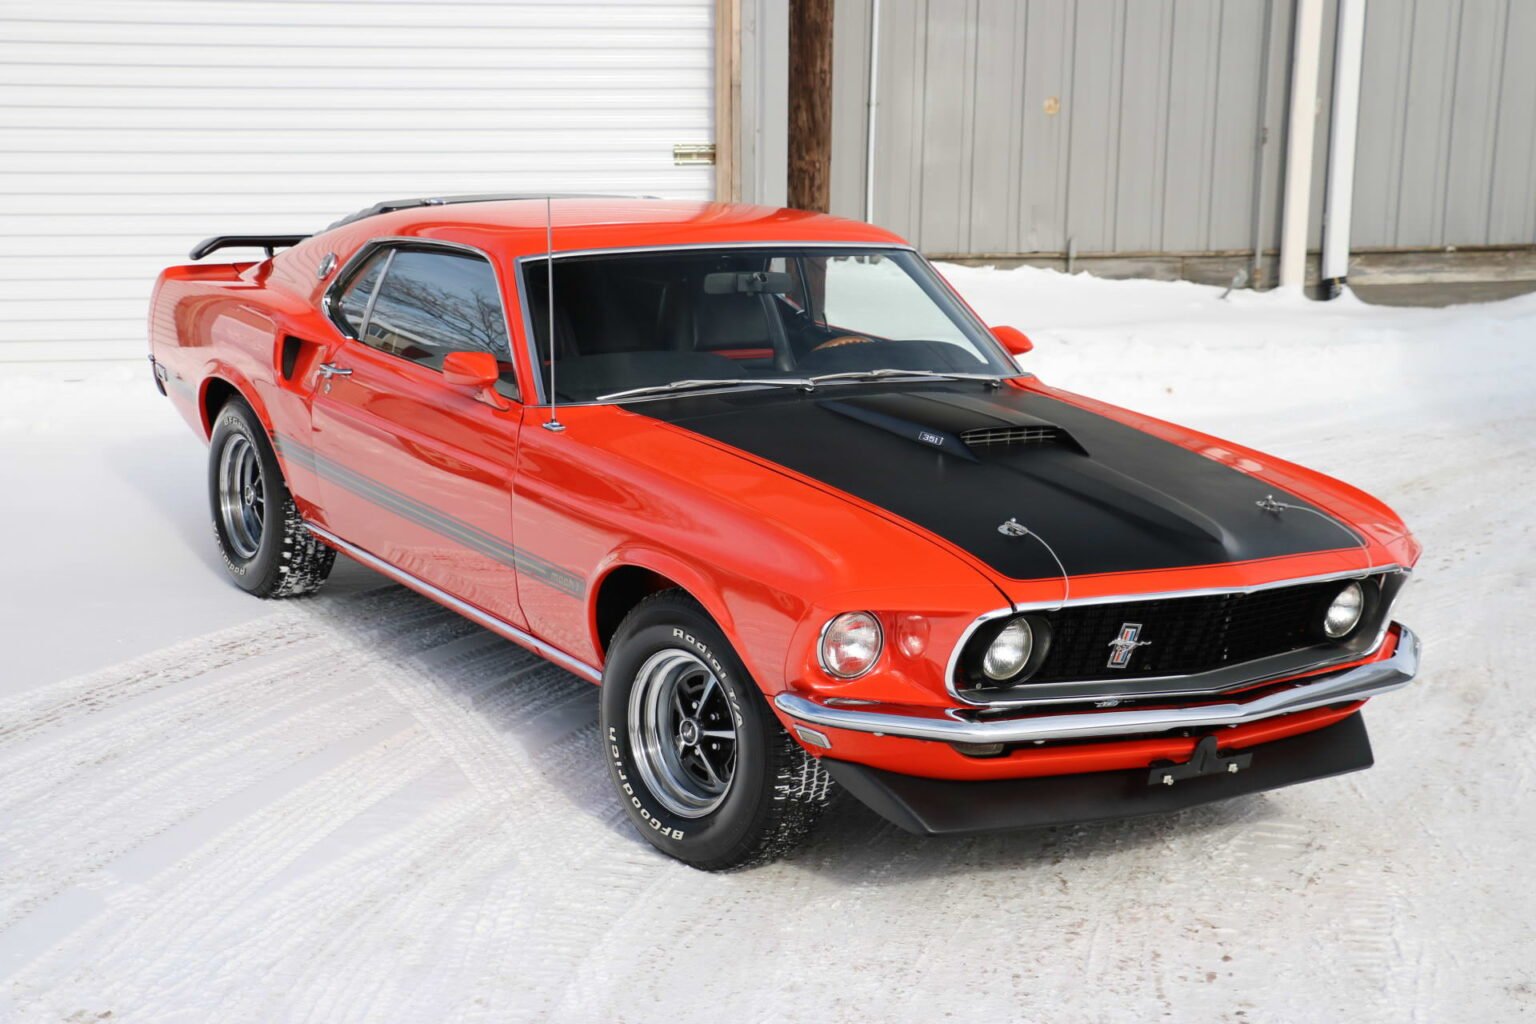 An Uprated 1969 Ford Mustang Mach 1 – Now With 402 hp + 456 lb ft